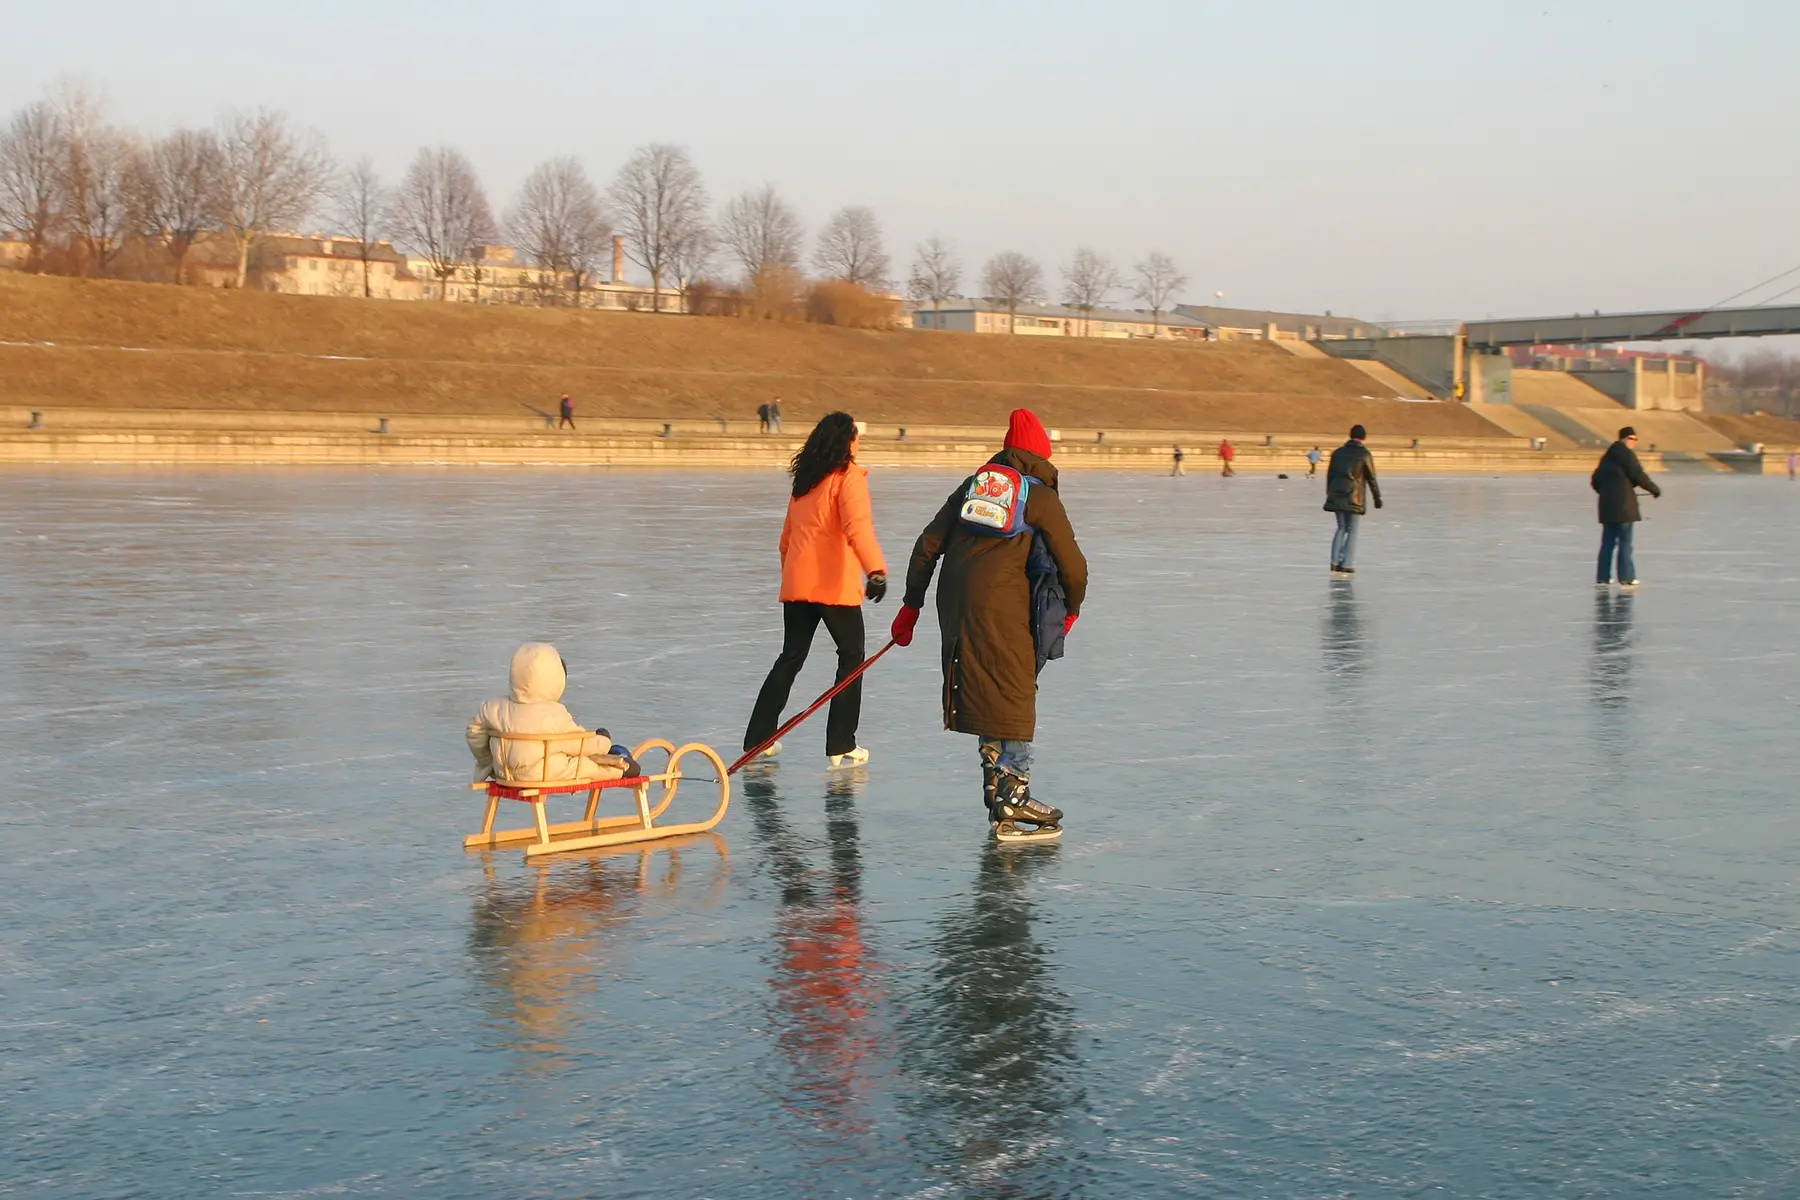 Family skating on the frozen Donau in Vienna